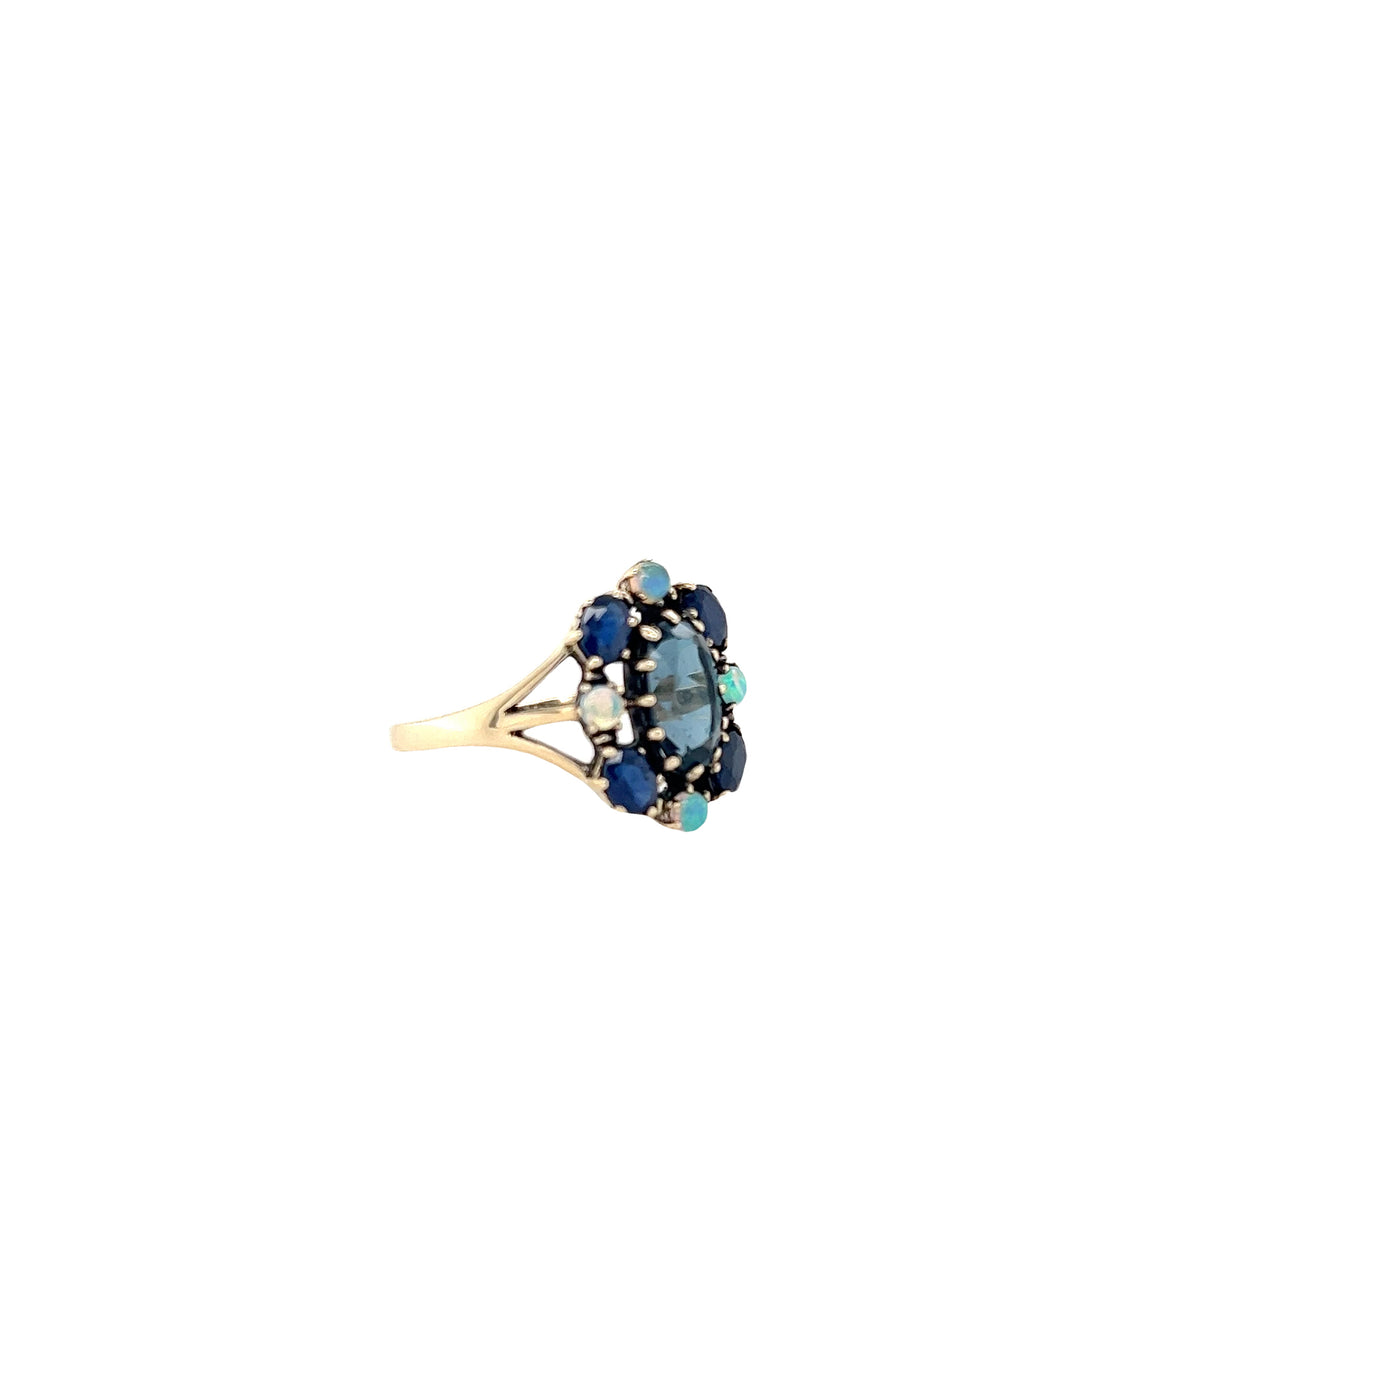 9 carat yellow gold ring with london blue topaz, sapphire and opals.